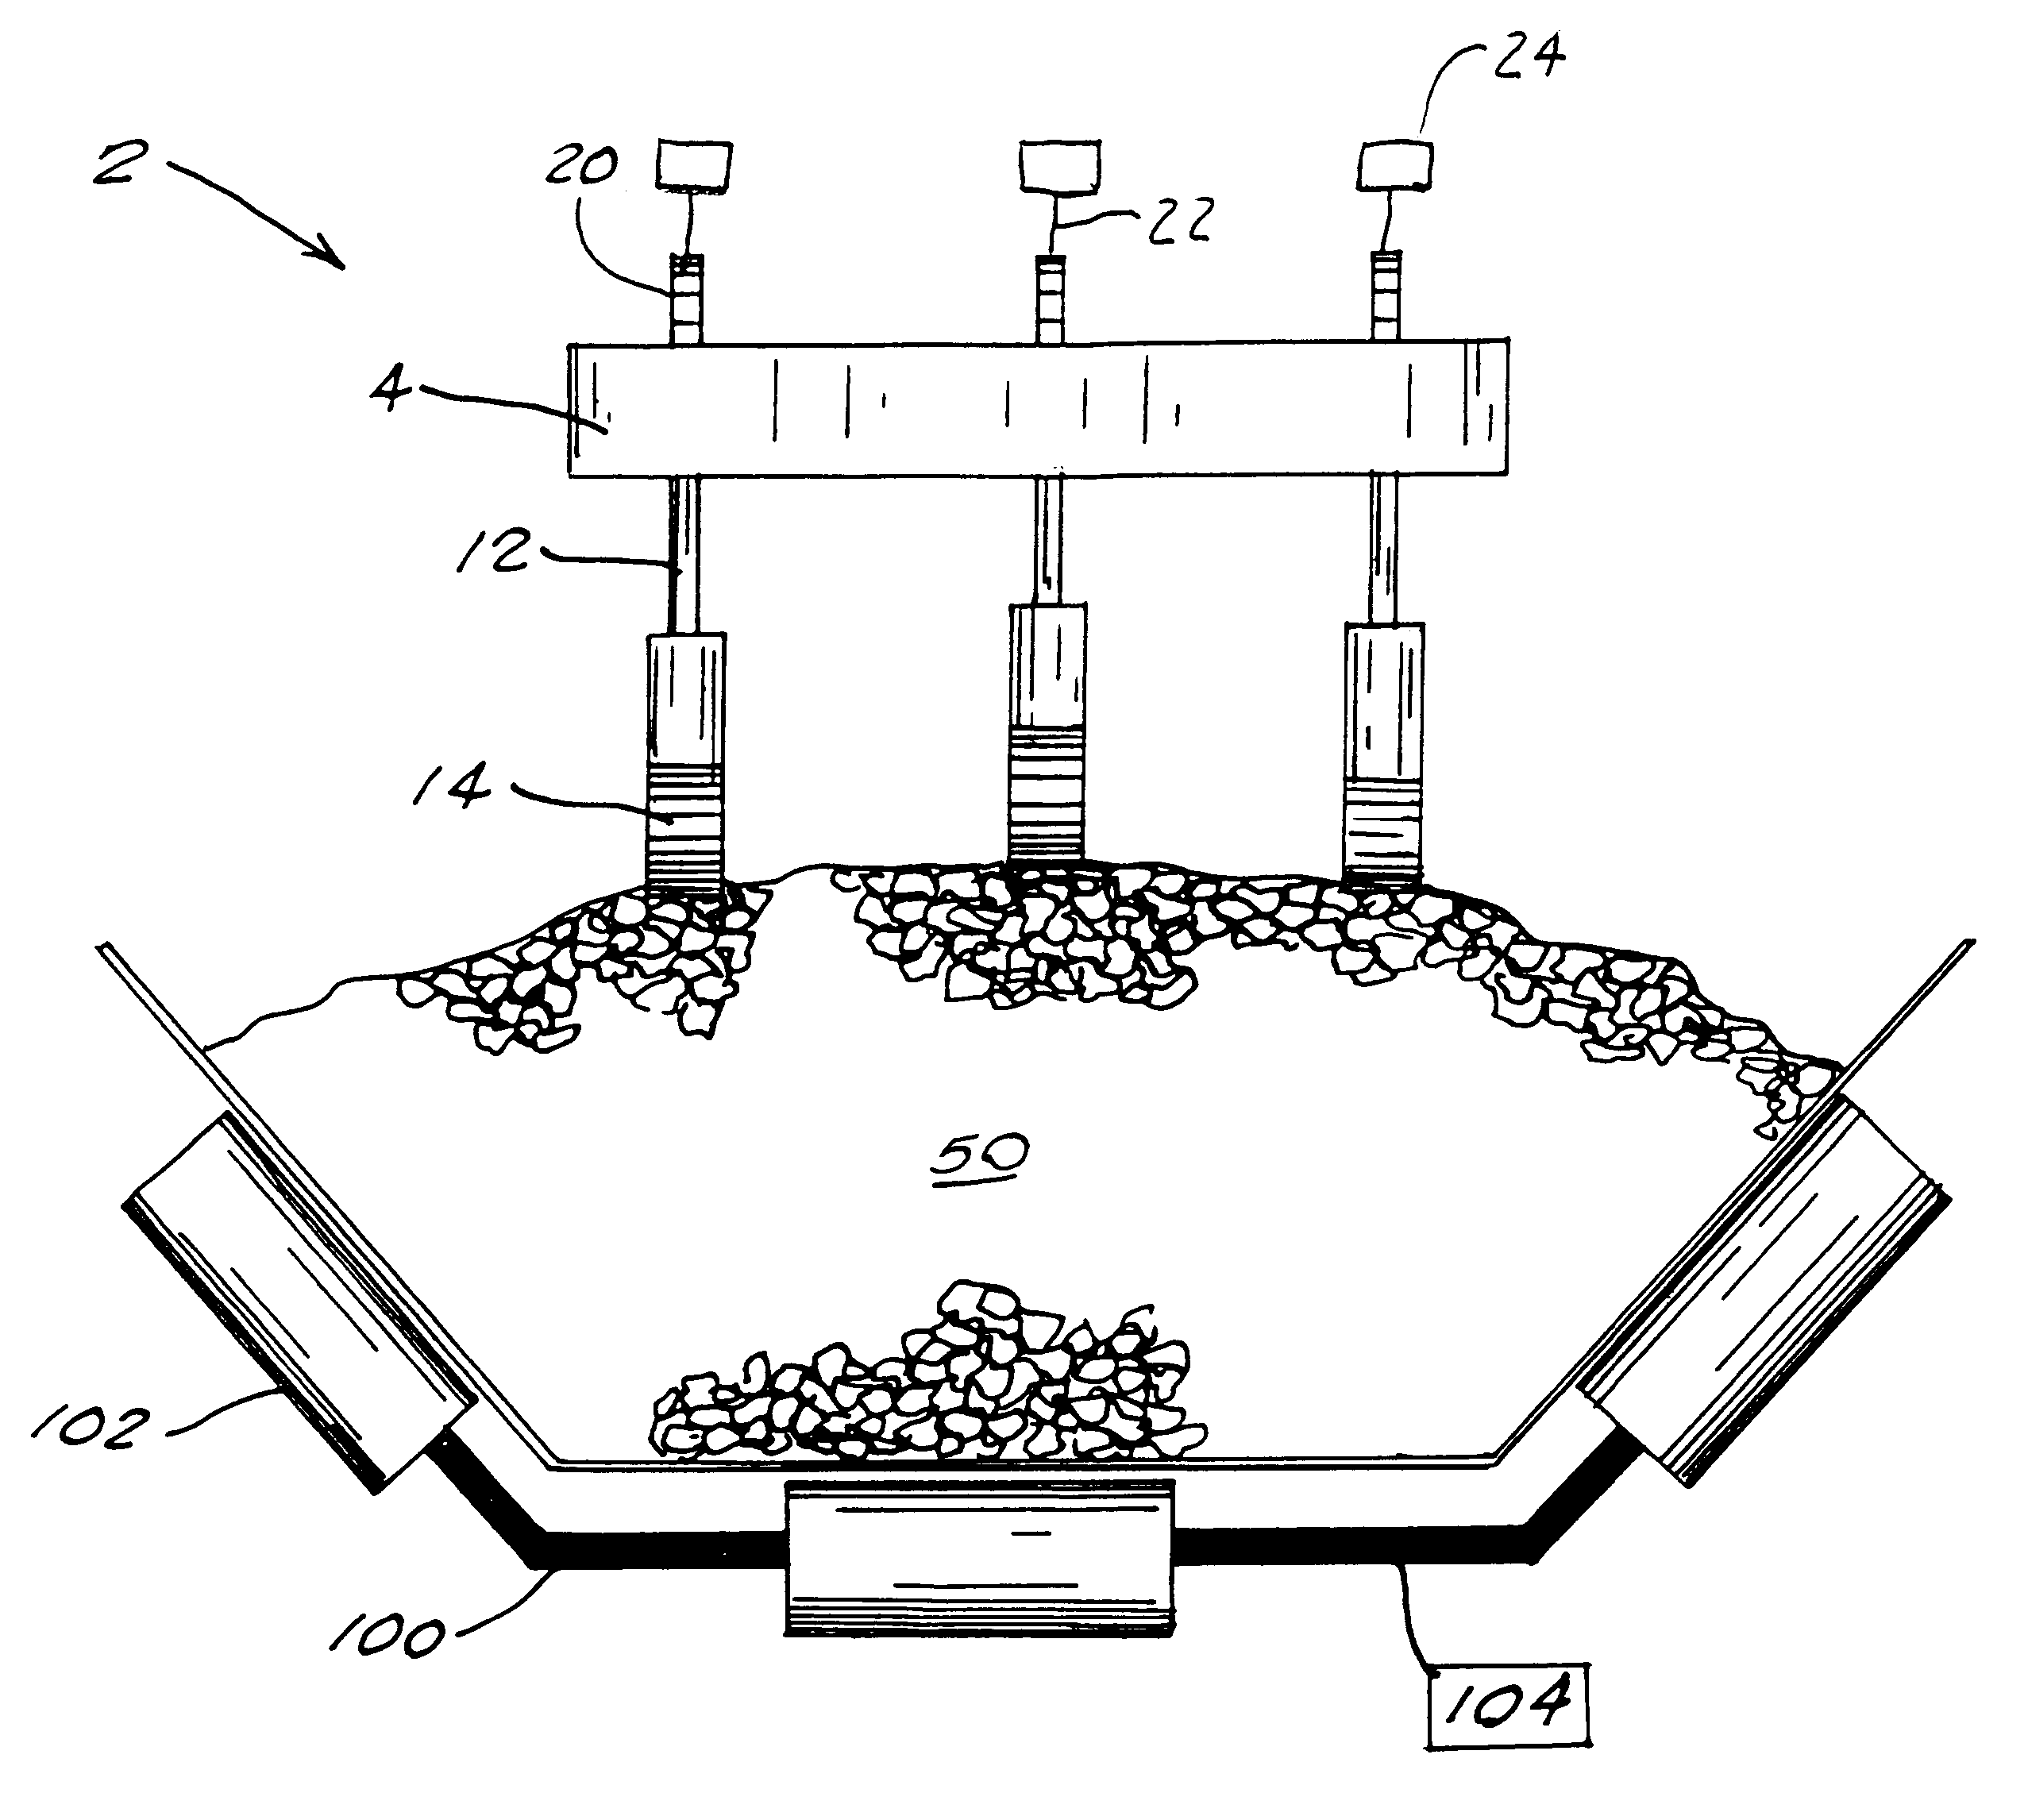 Height measurement apparatus for determining the volume/density of wood chips on a conveyor